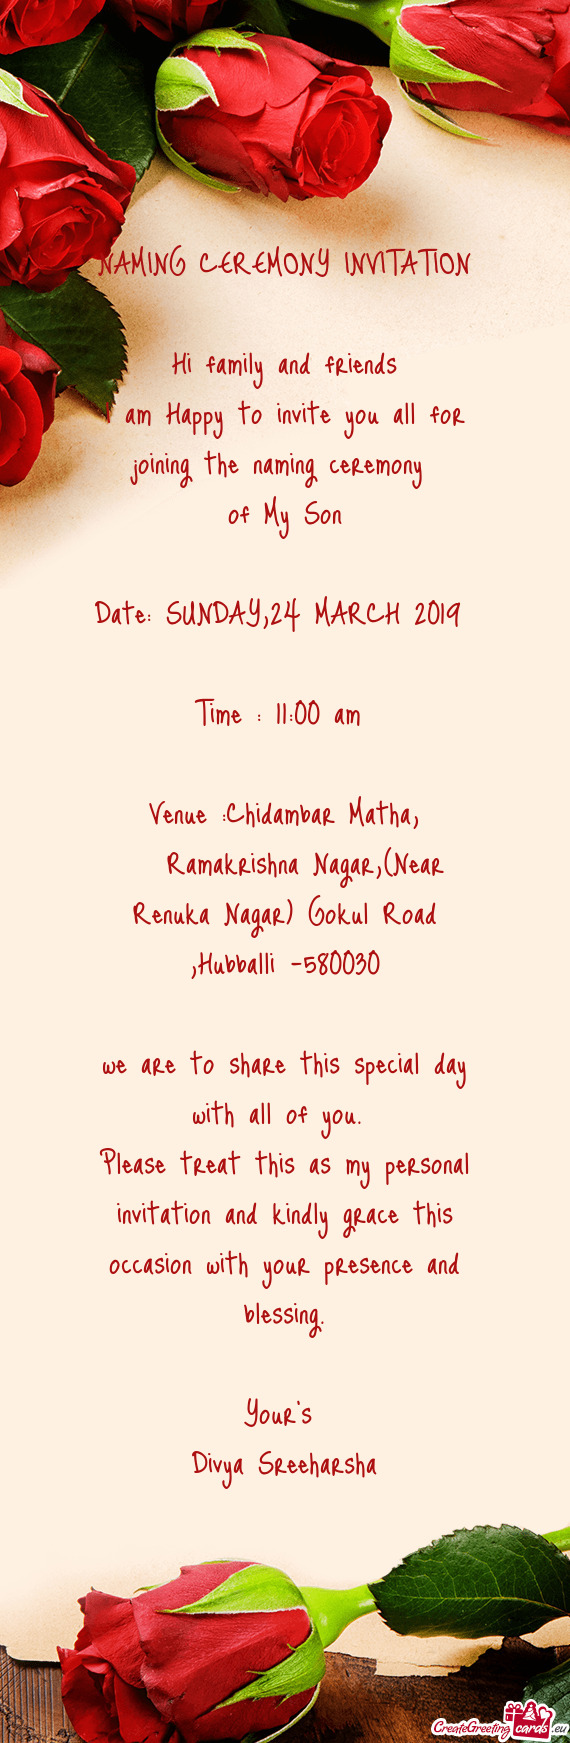 Hubballi -580030
 
 we are to share this special day with all of you